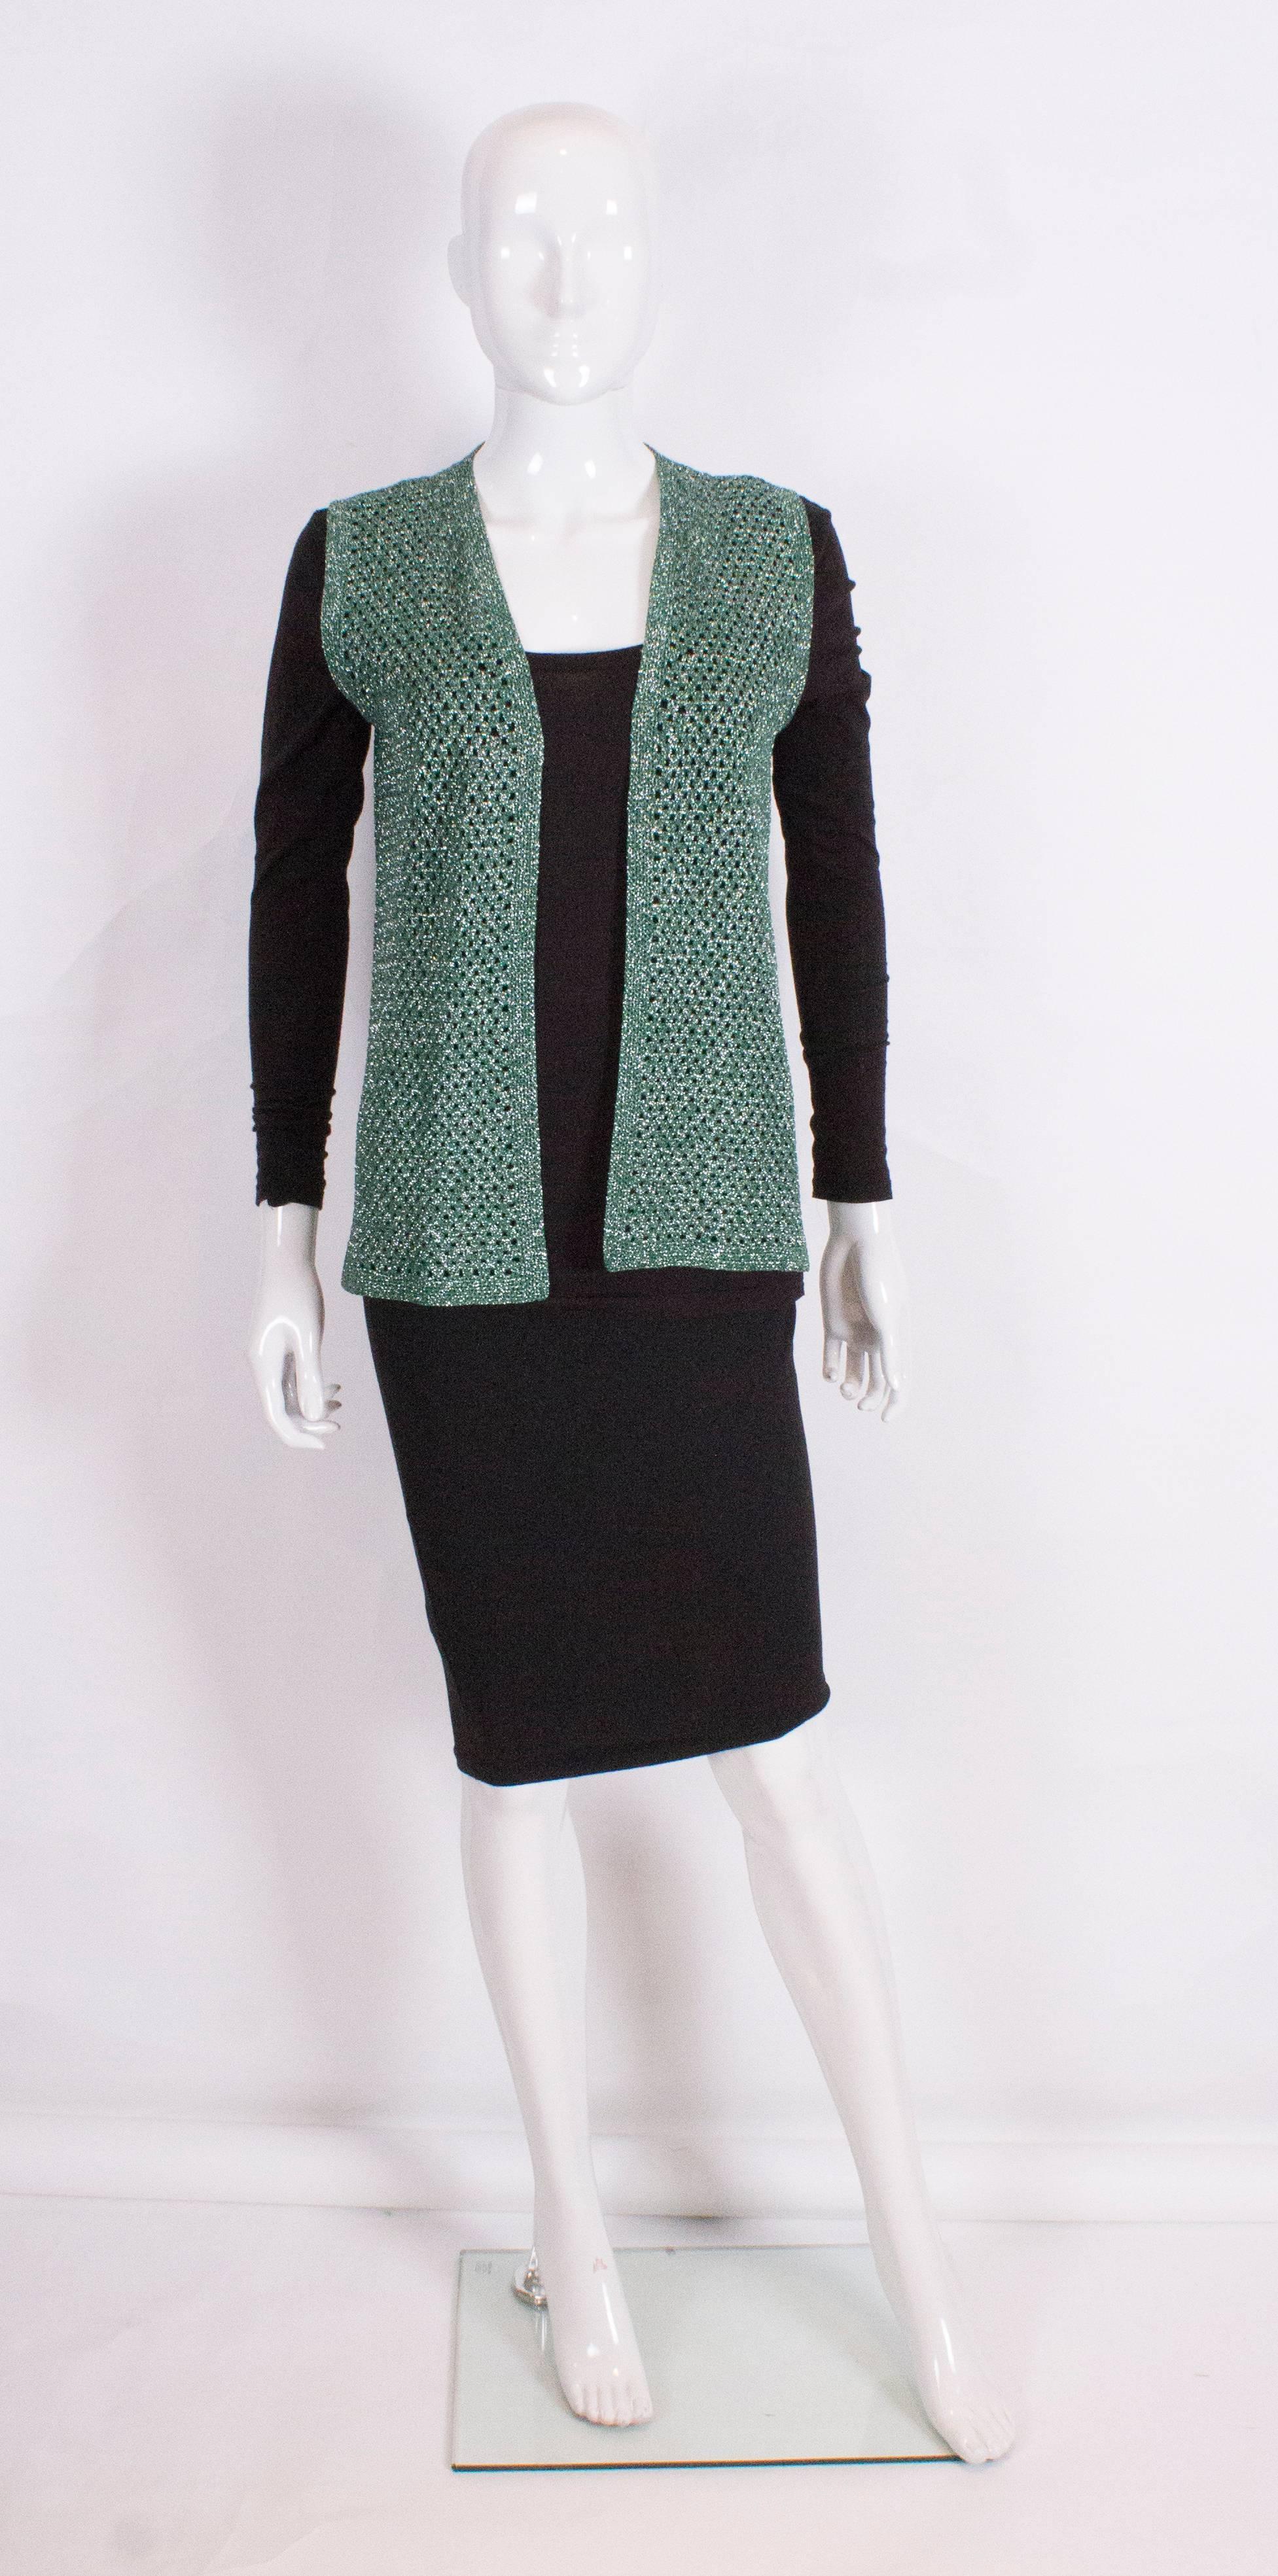 An easy to wear silver and green sleevless crochet gilet.